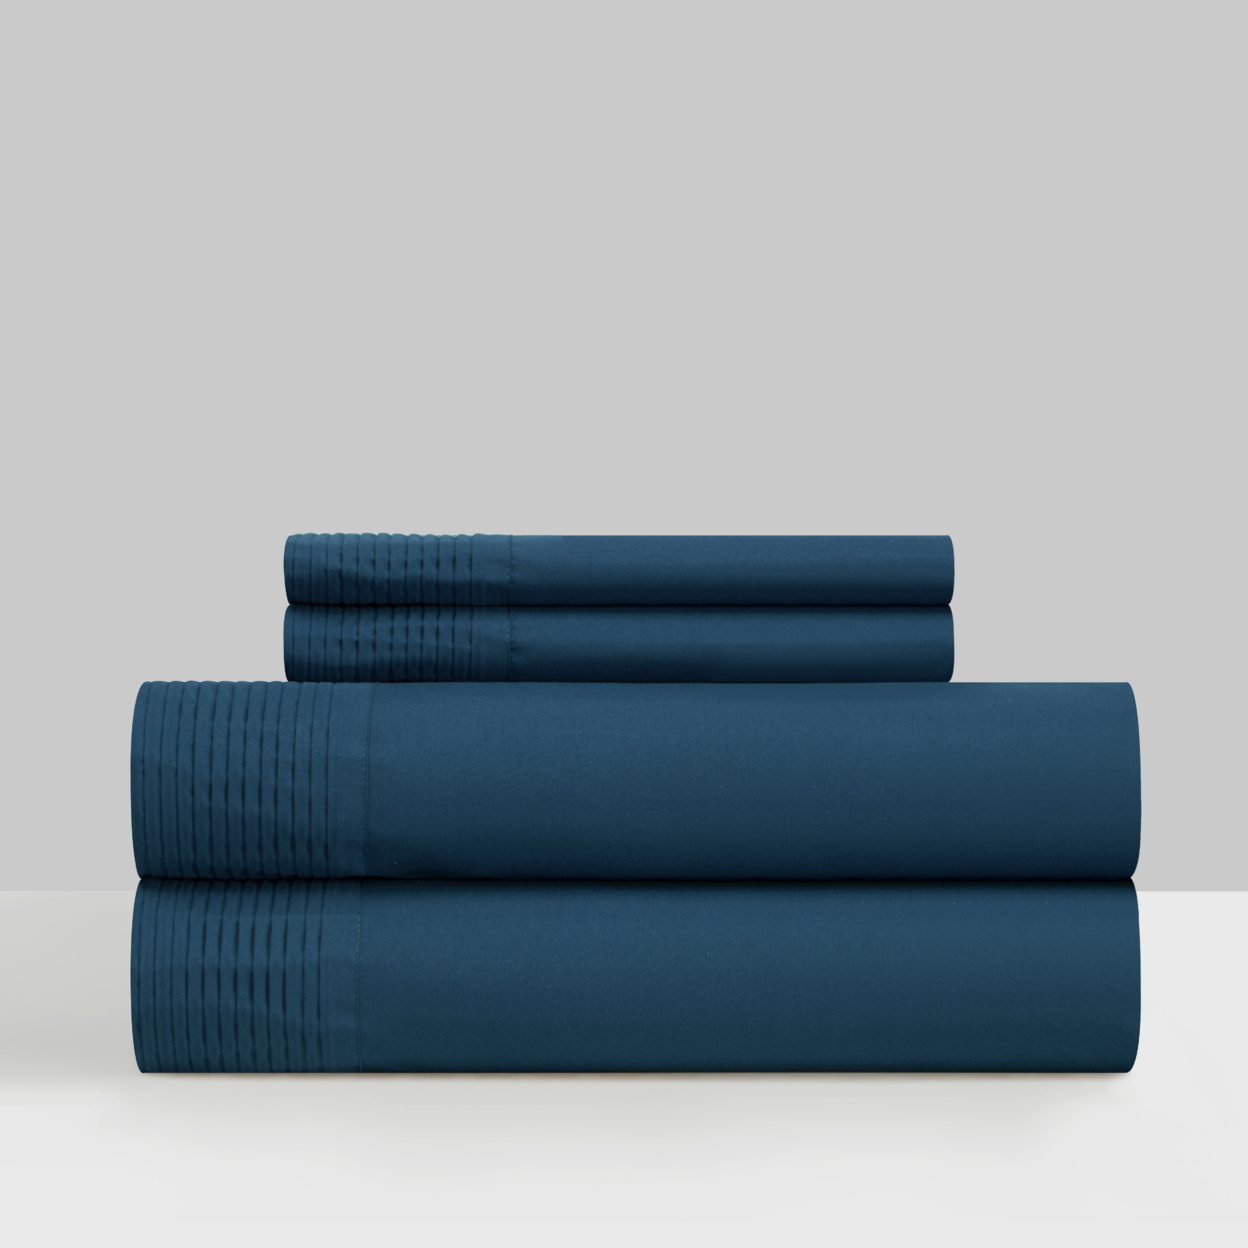 Barley 3 Or 4 Piece Sheet Set Solid Color With Pleated Details - Blue, Twin